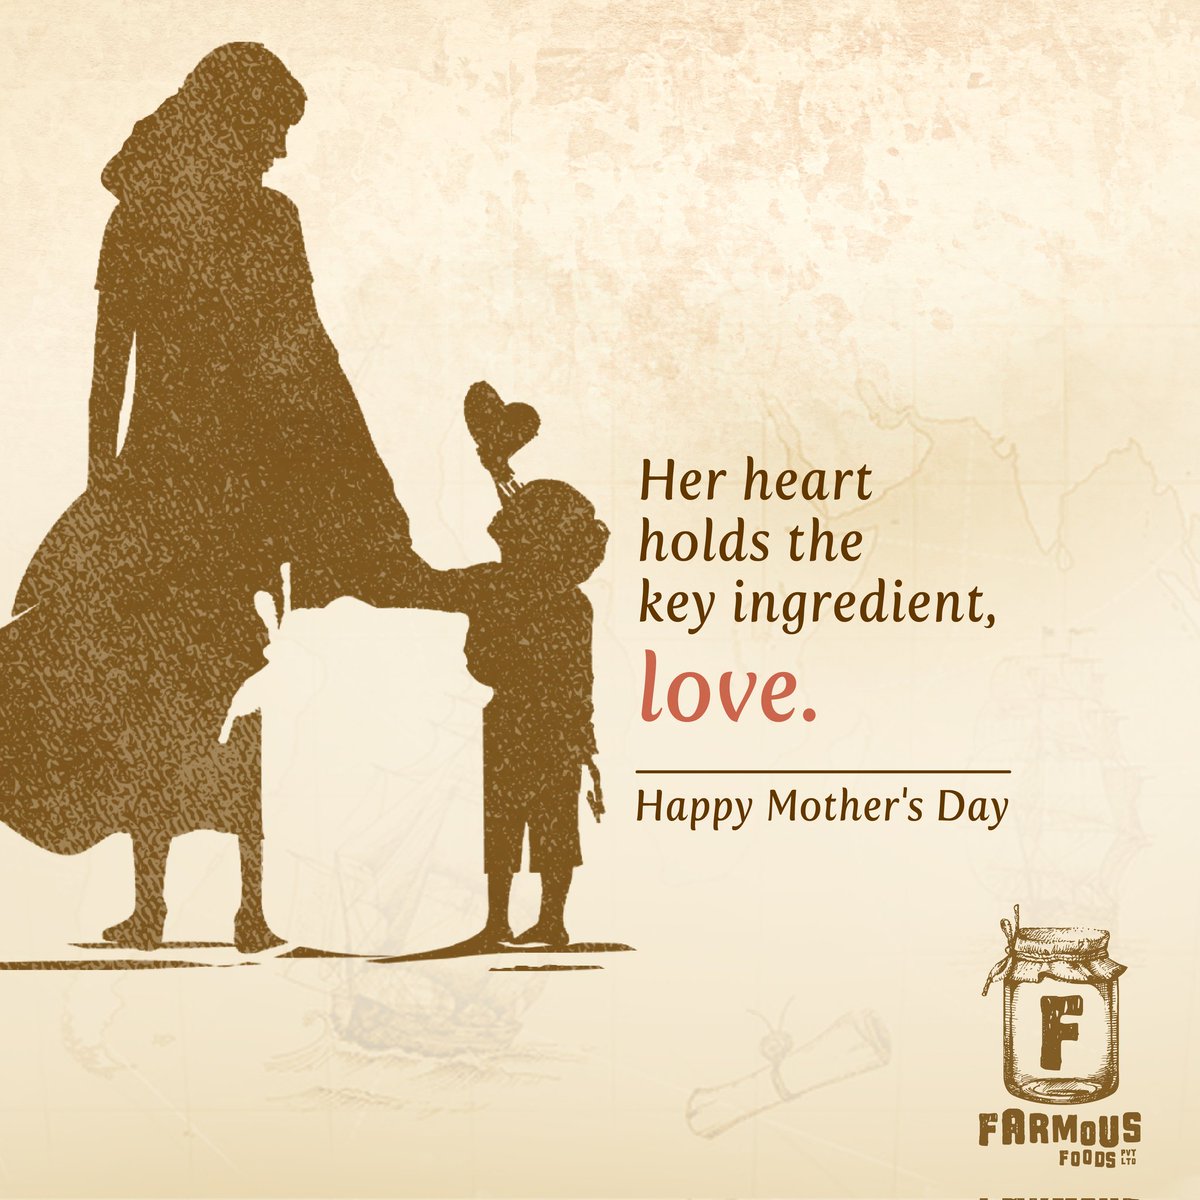 Nothing compares to the magic of mom’s cooking. Wishing mothers everywhere a Happy Mother’s Day.

#farmousfoods #mothersday #mothersdaygift #gift #happymothersday #women #bestchef #authenticindian #cheflife #goodfood